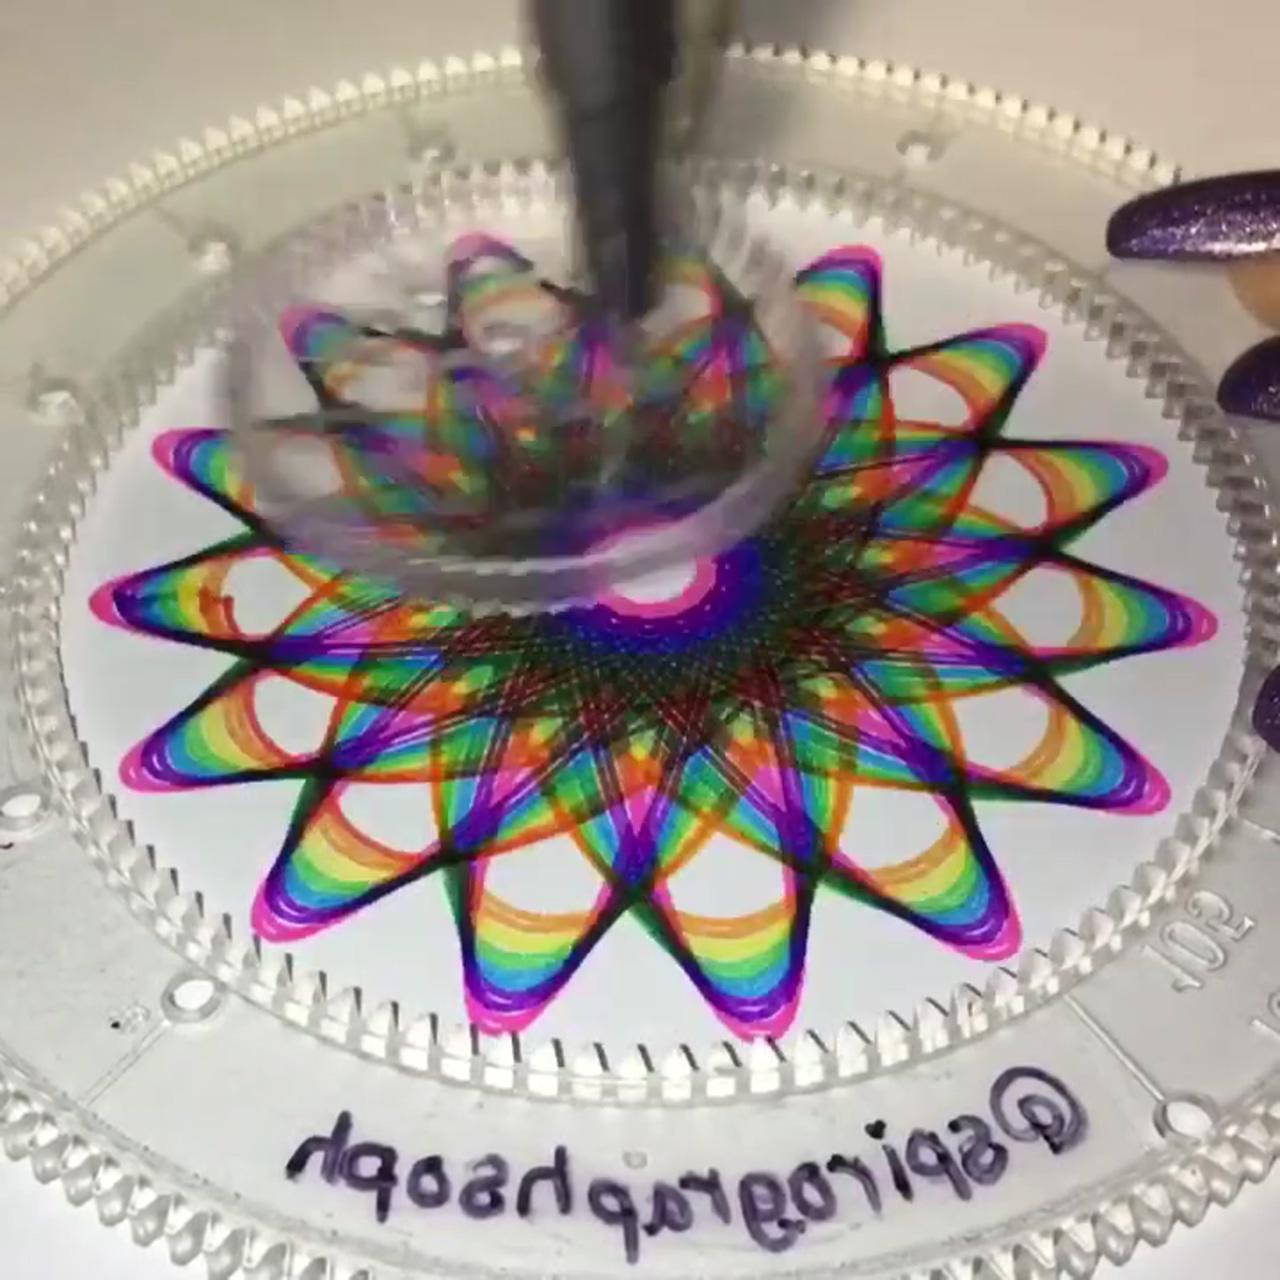 So satisfying to watch; satisfying drop and squish with cutting